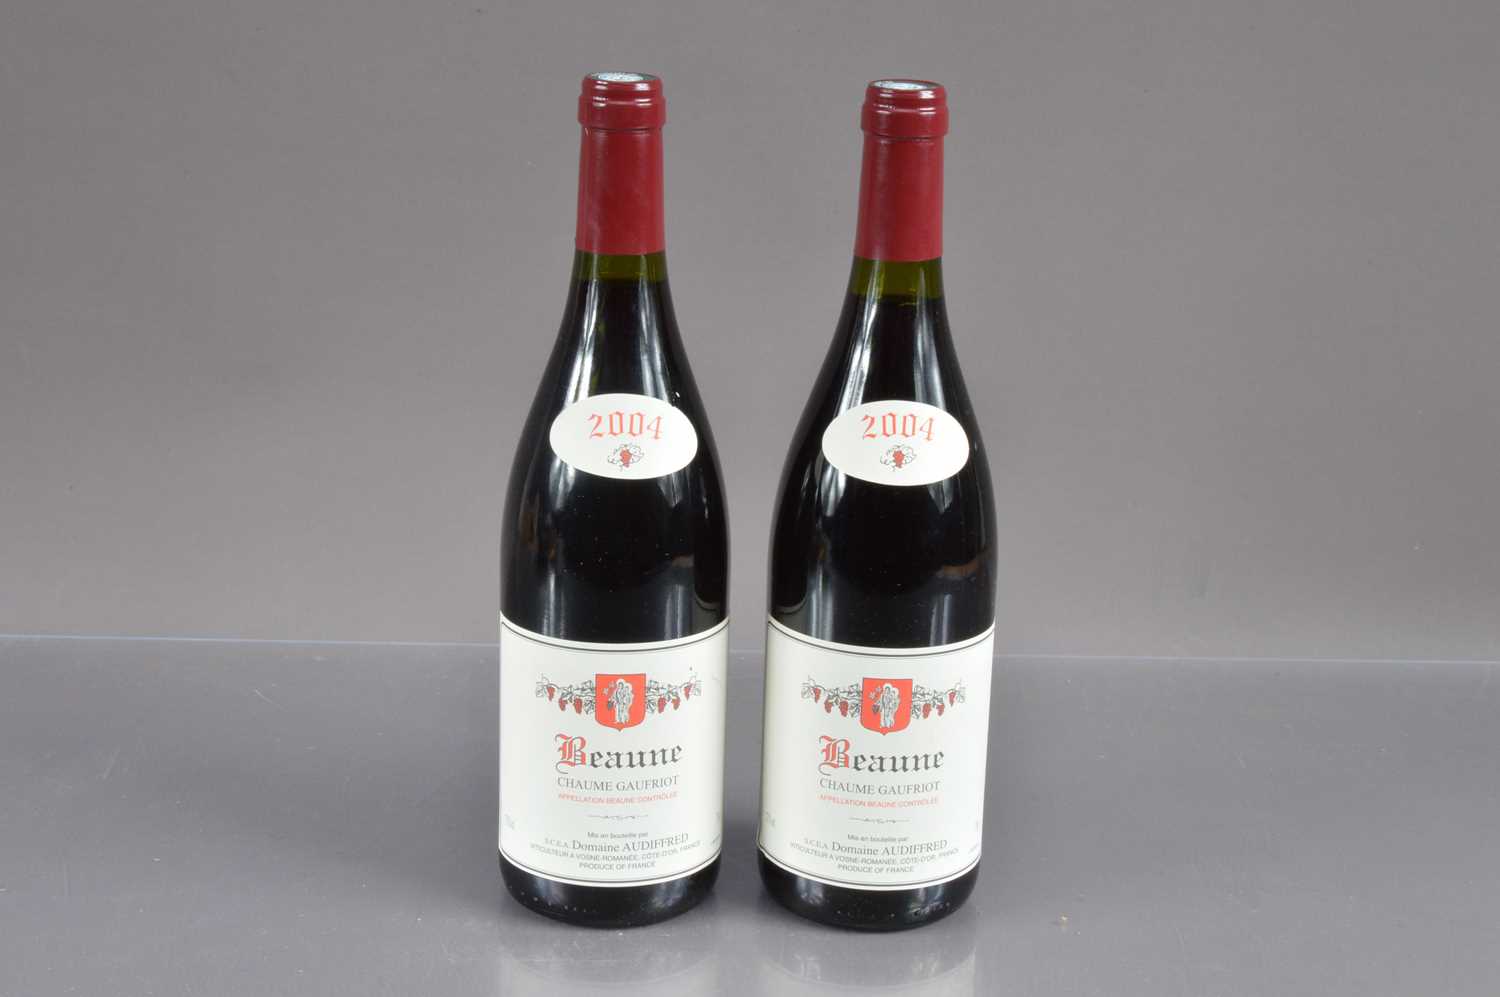 Lot 54 - Two bottles of Beaune Chaume Gaufriot 2004